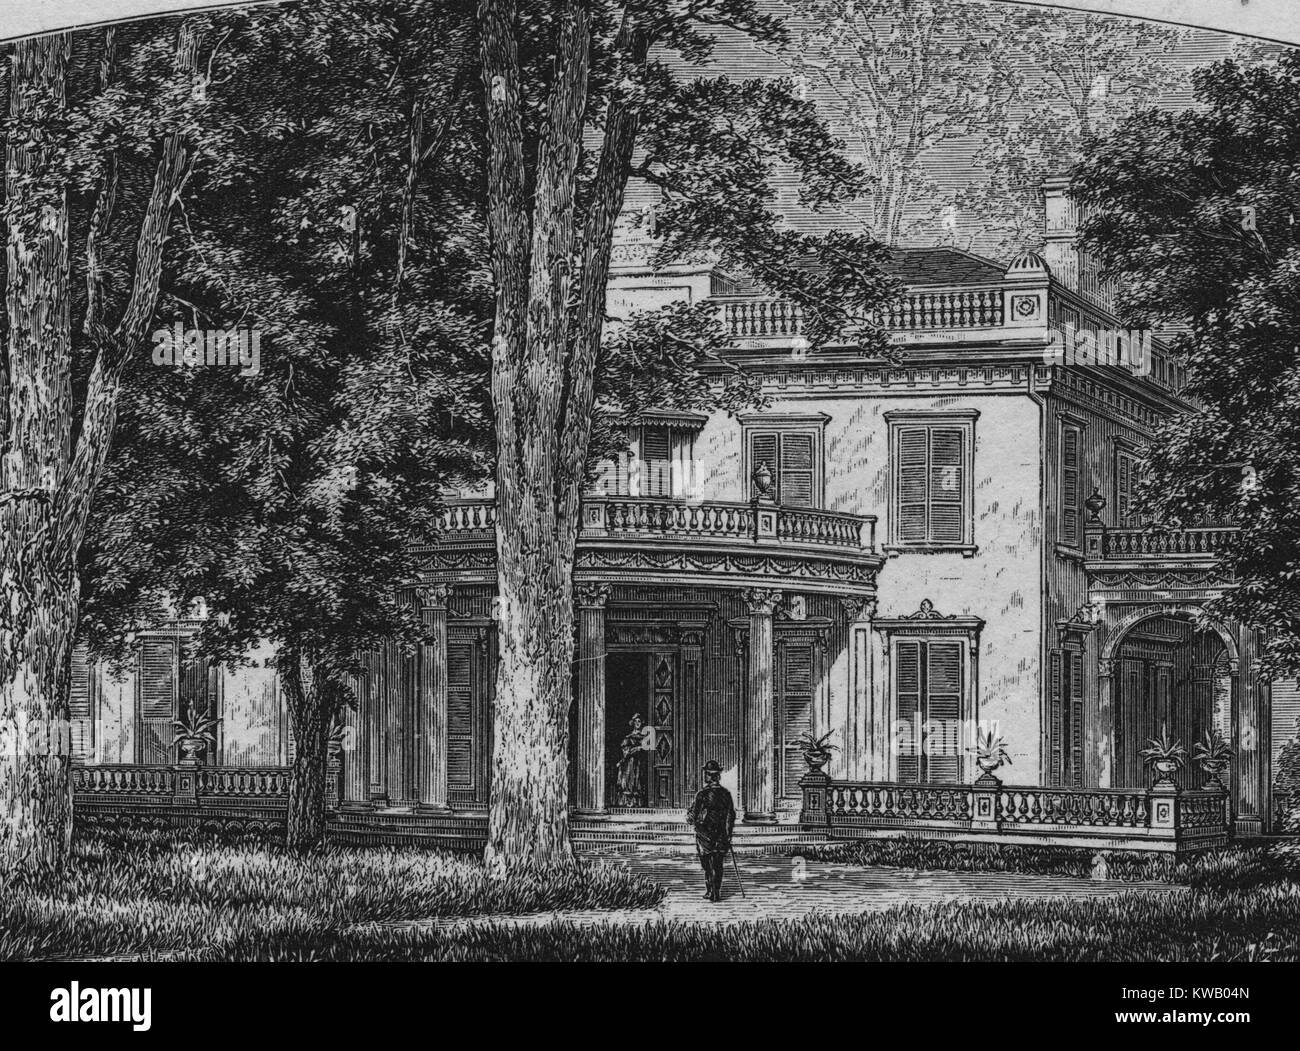 Engraving of the exterior of Montgomery Place, an early 19th century estate and National Historic Landmark, Annandale-on-Hudson, New York, 1836. From the New York Public Library. Stock Photo